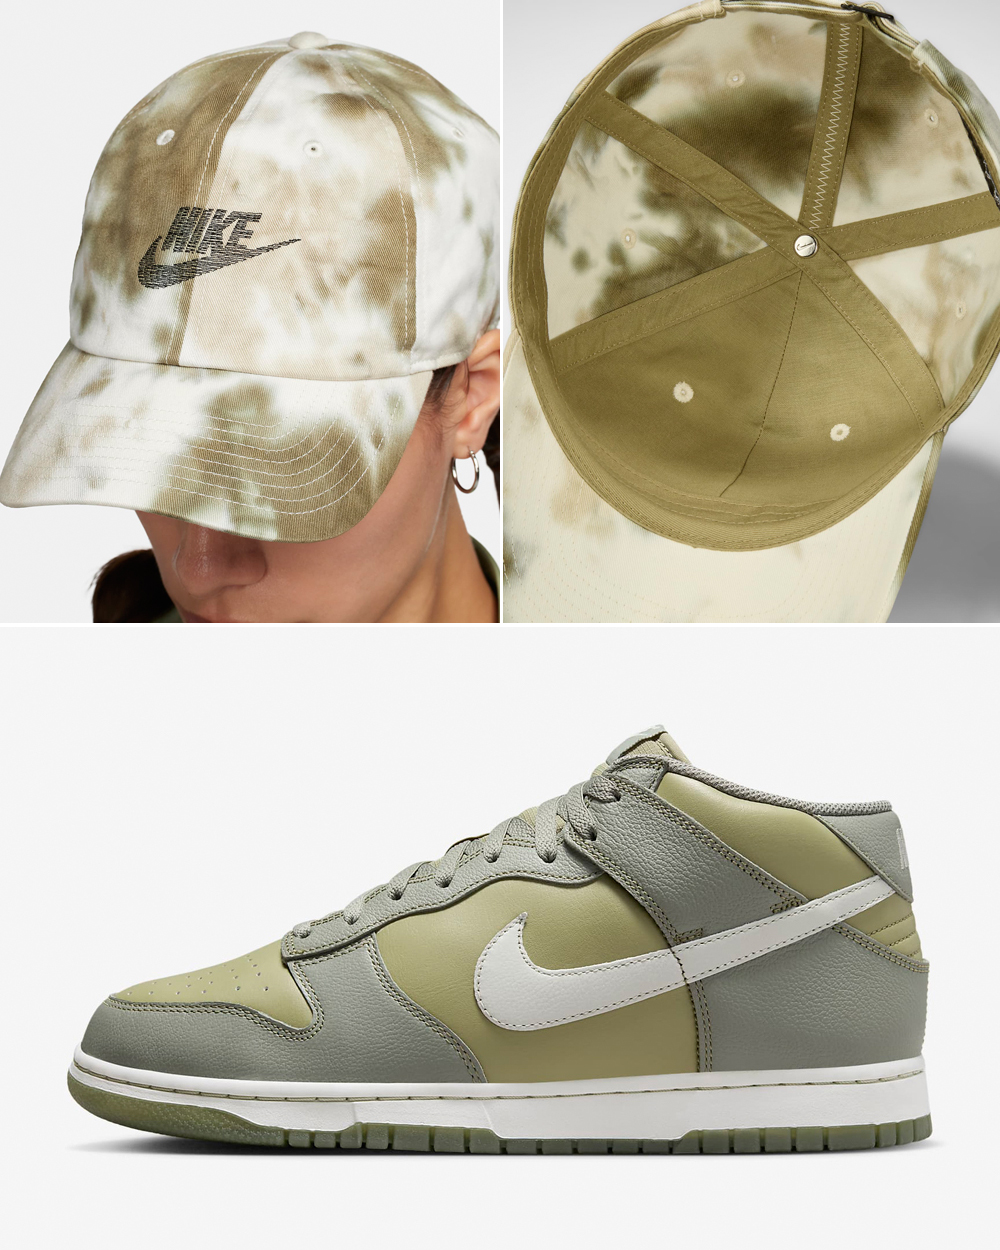 Nike-Dunk-Mid-Dark-Stucco-Neutral-Olive-Hat-Matching-Outfit